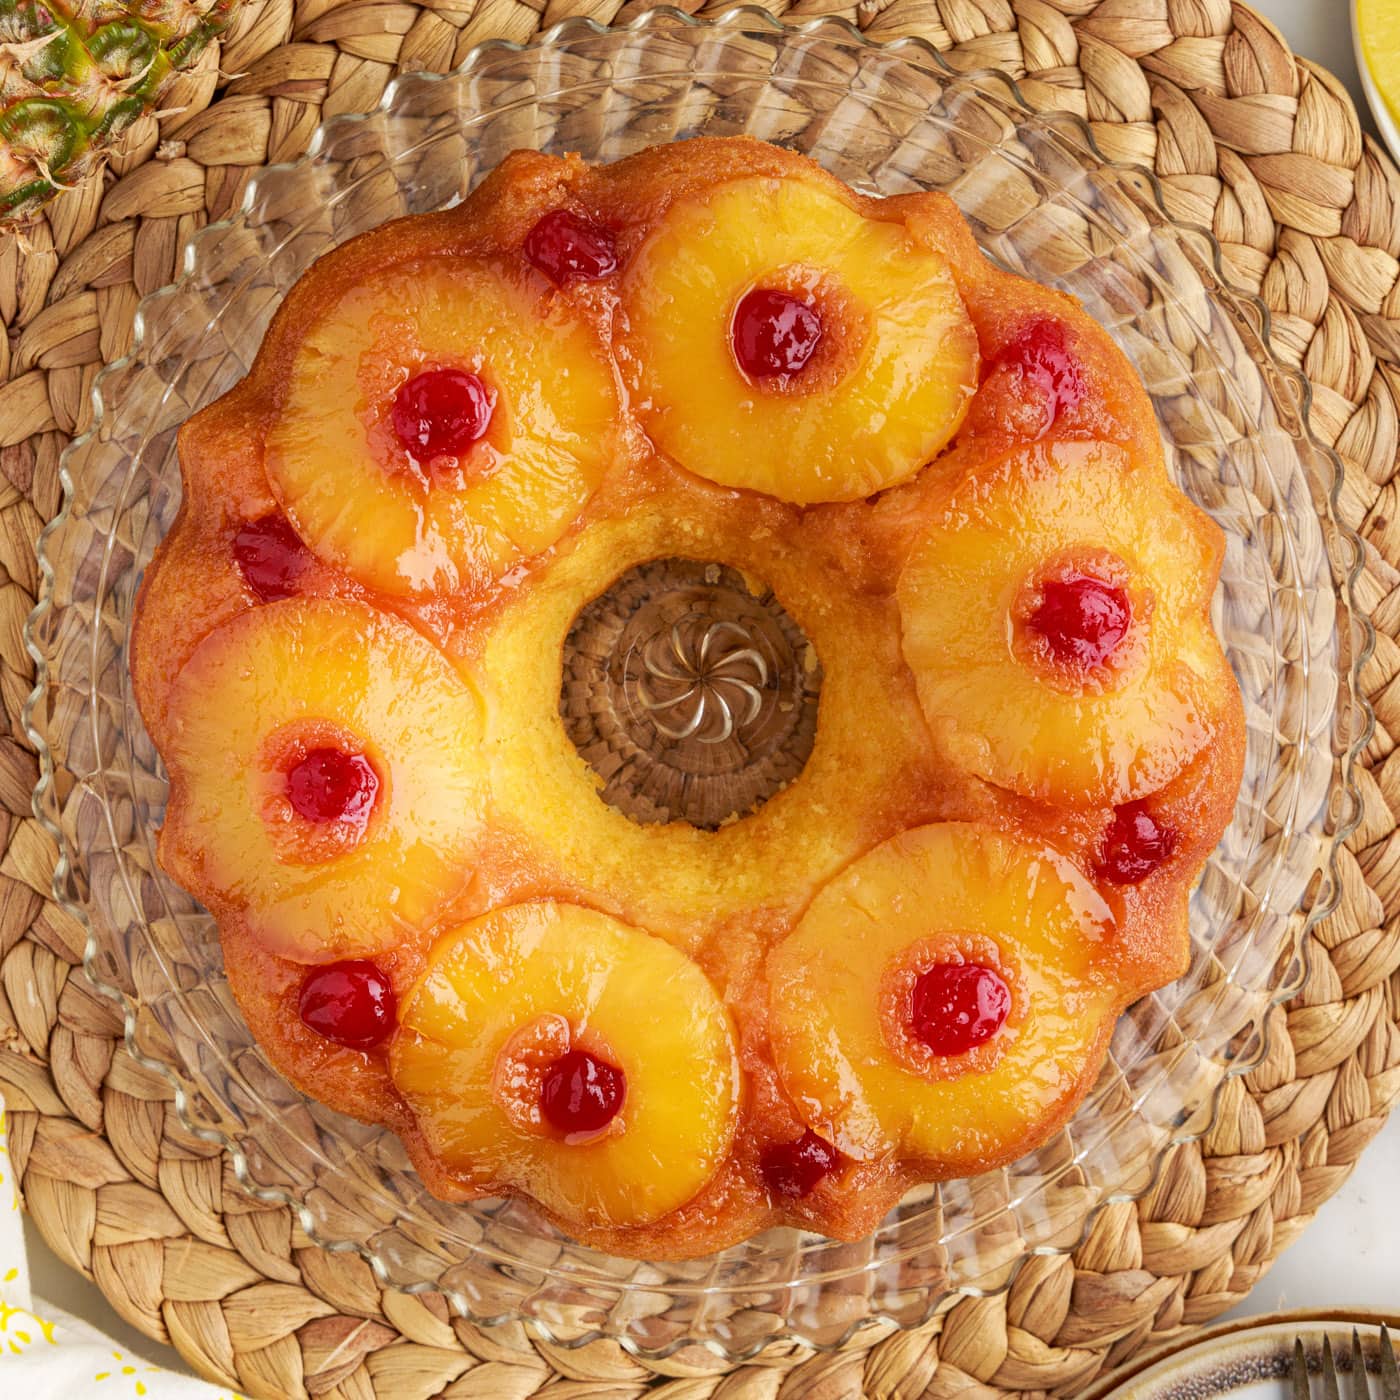 Pineapple Upside Down Cake Recipe - Cooking Classy